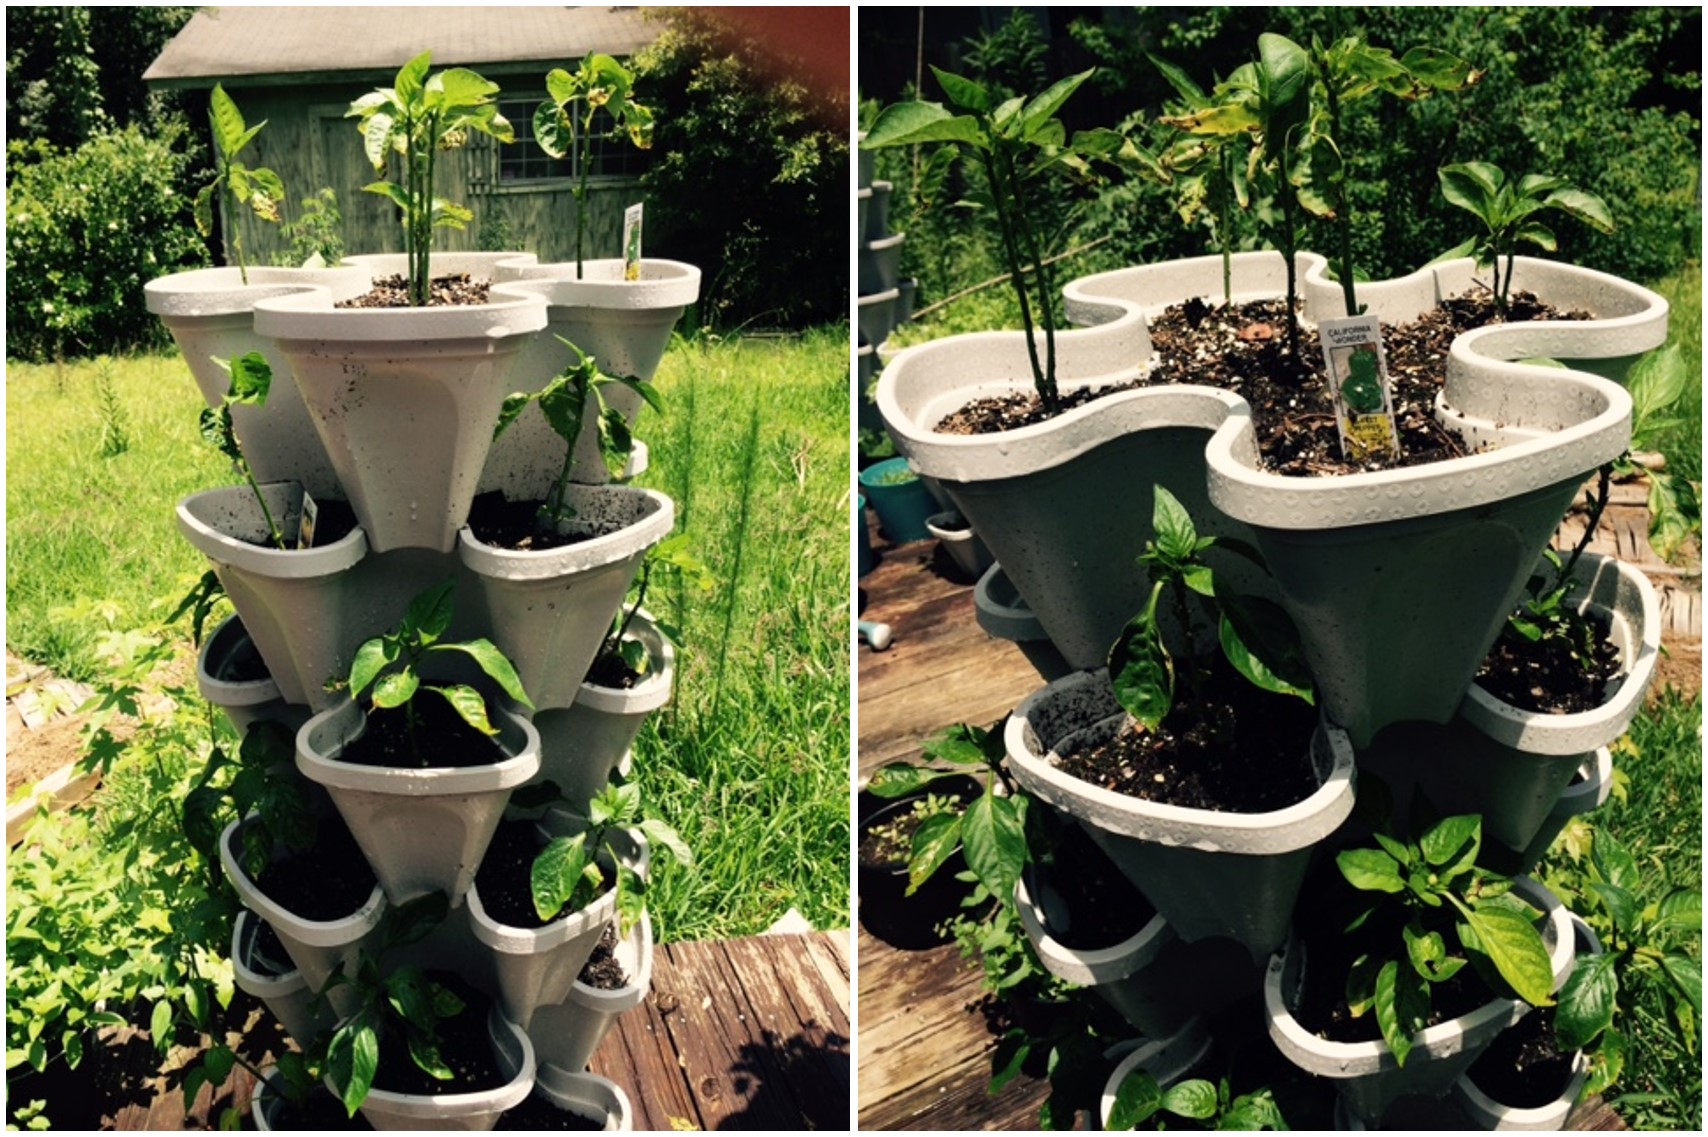 Hot Peppers & Bell Peppers Growing In Stacky